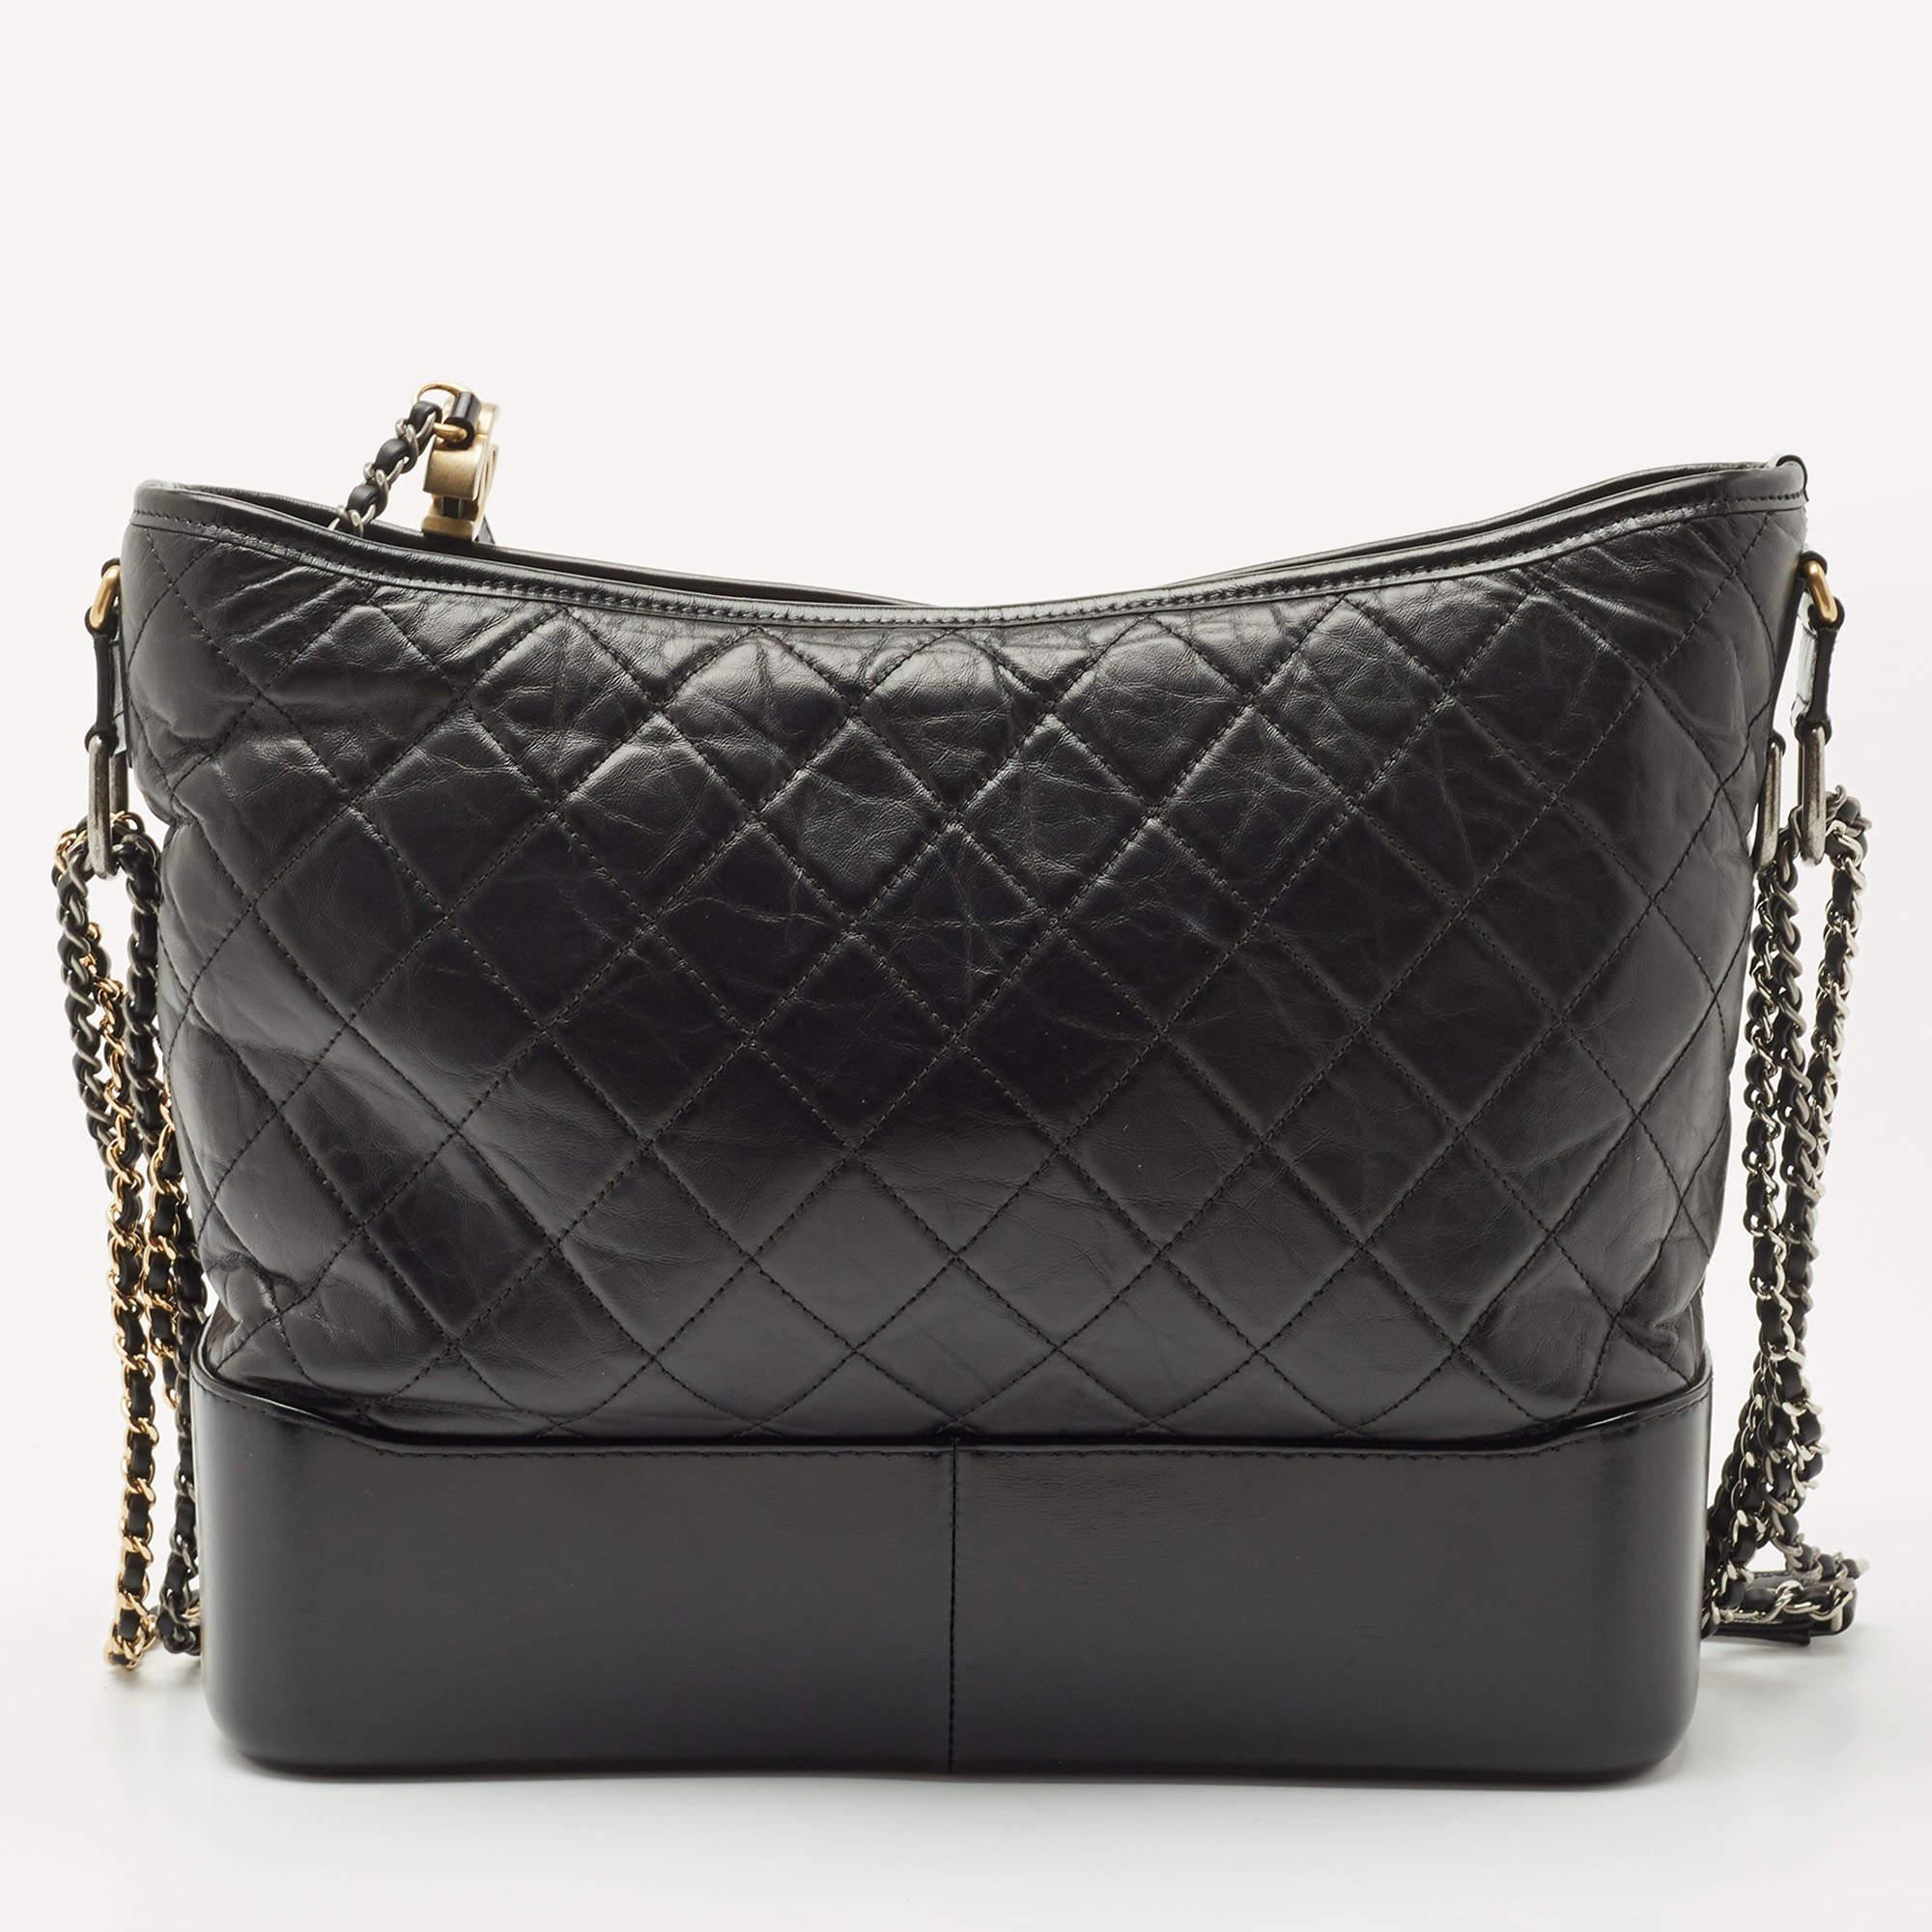 Get yourself this beautiful Gabrielle bag from the iconic house of Chanel. It exudes style and will always deliver sophistication. Crafted in Italy and made from aged leather, it comes in lovely shades of black. The exterior flaunts the signature